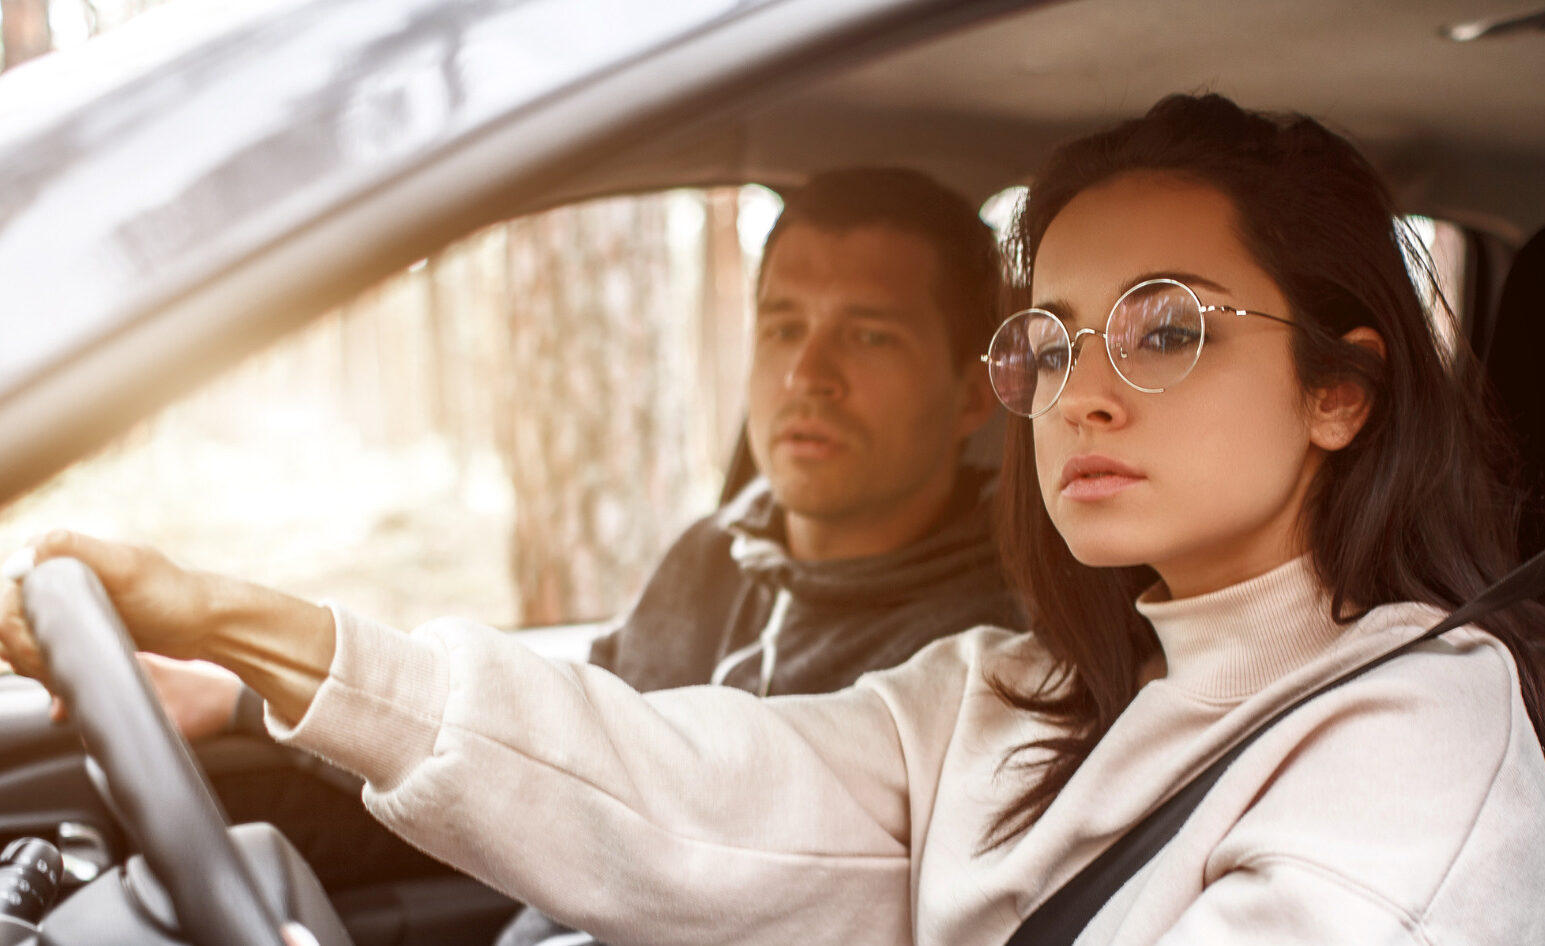 A detailed guide on how to use a learner's permit to prepare for the driver's license